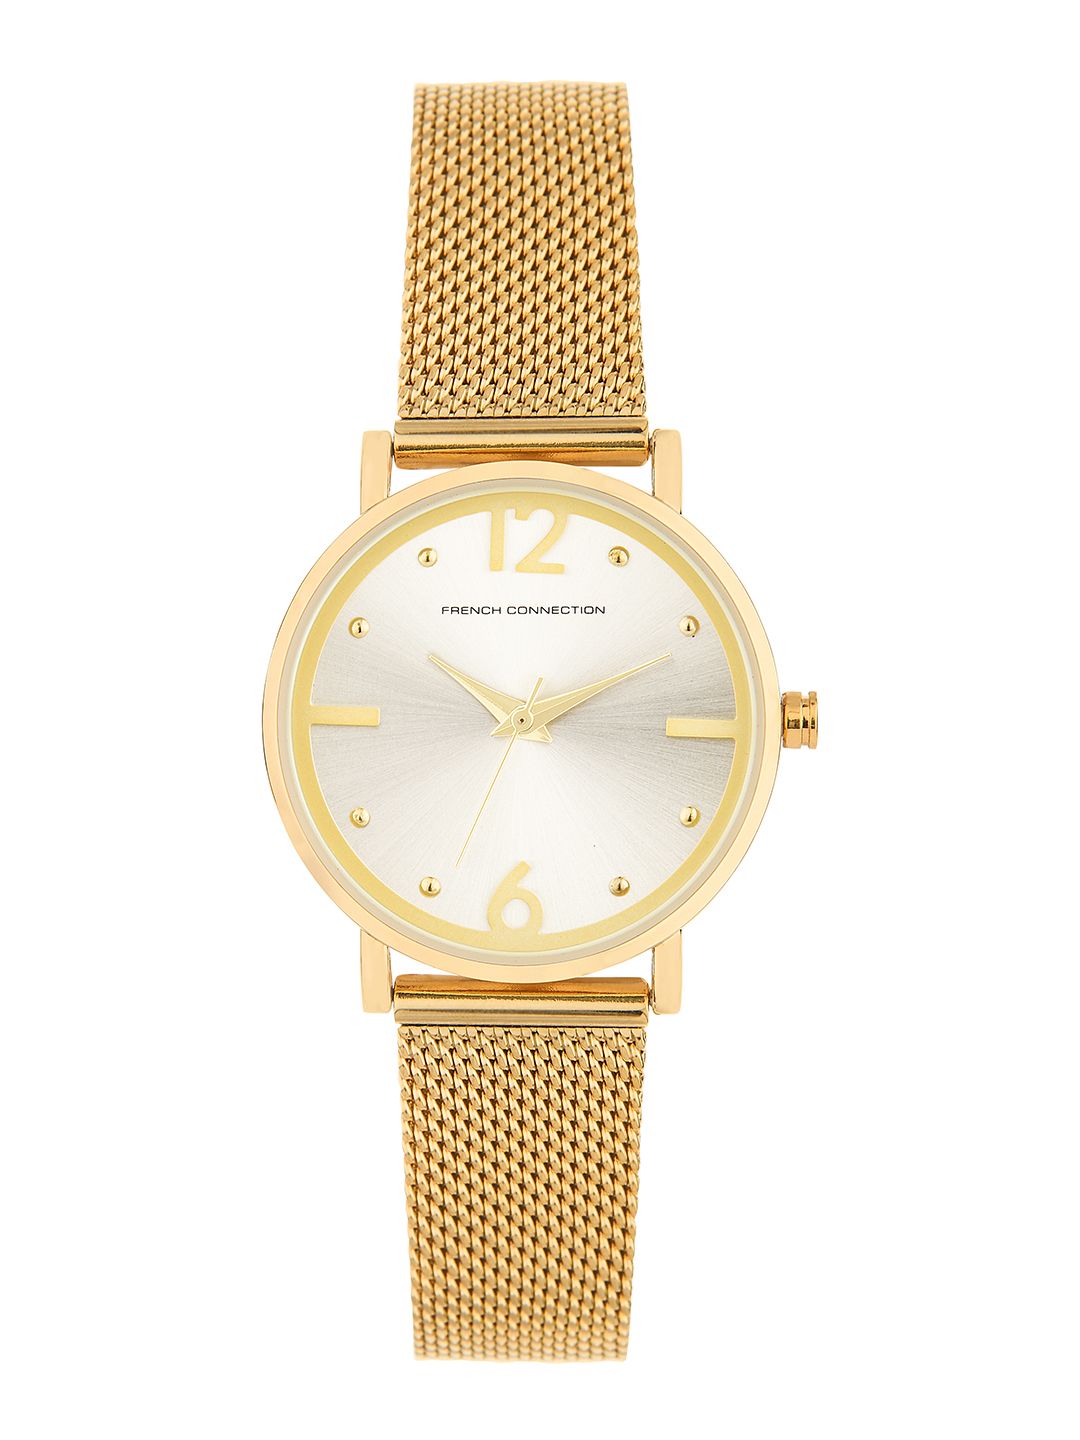 French Connection Women Gold-Toned Analogue Watch FCN0006C Price in India